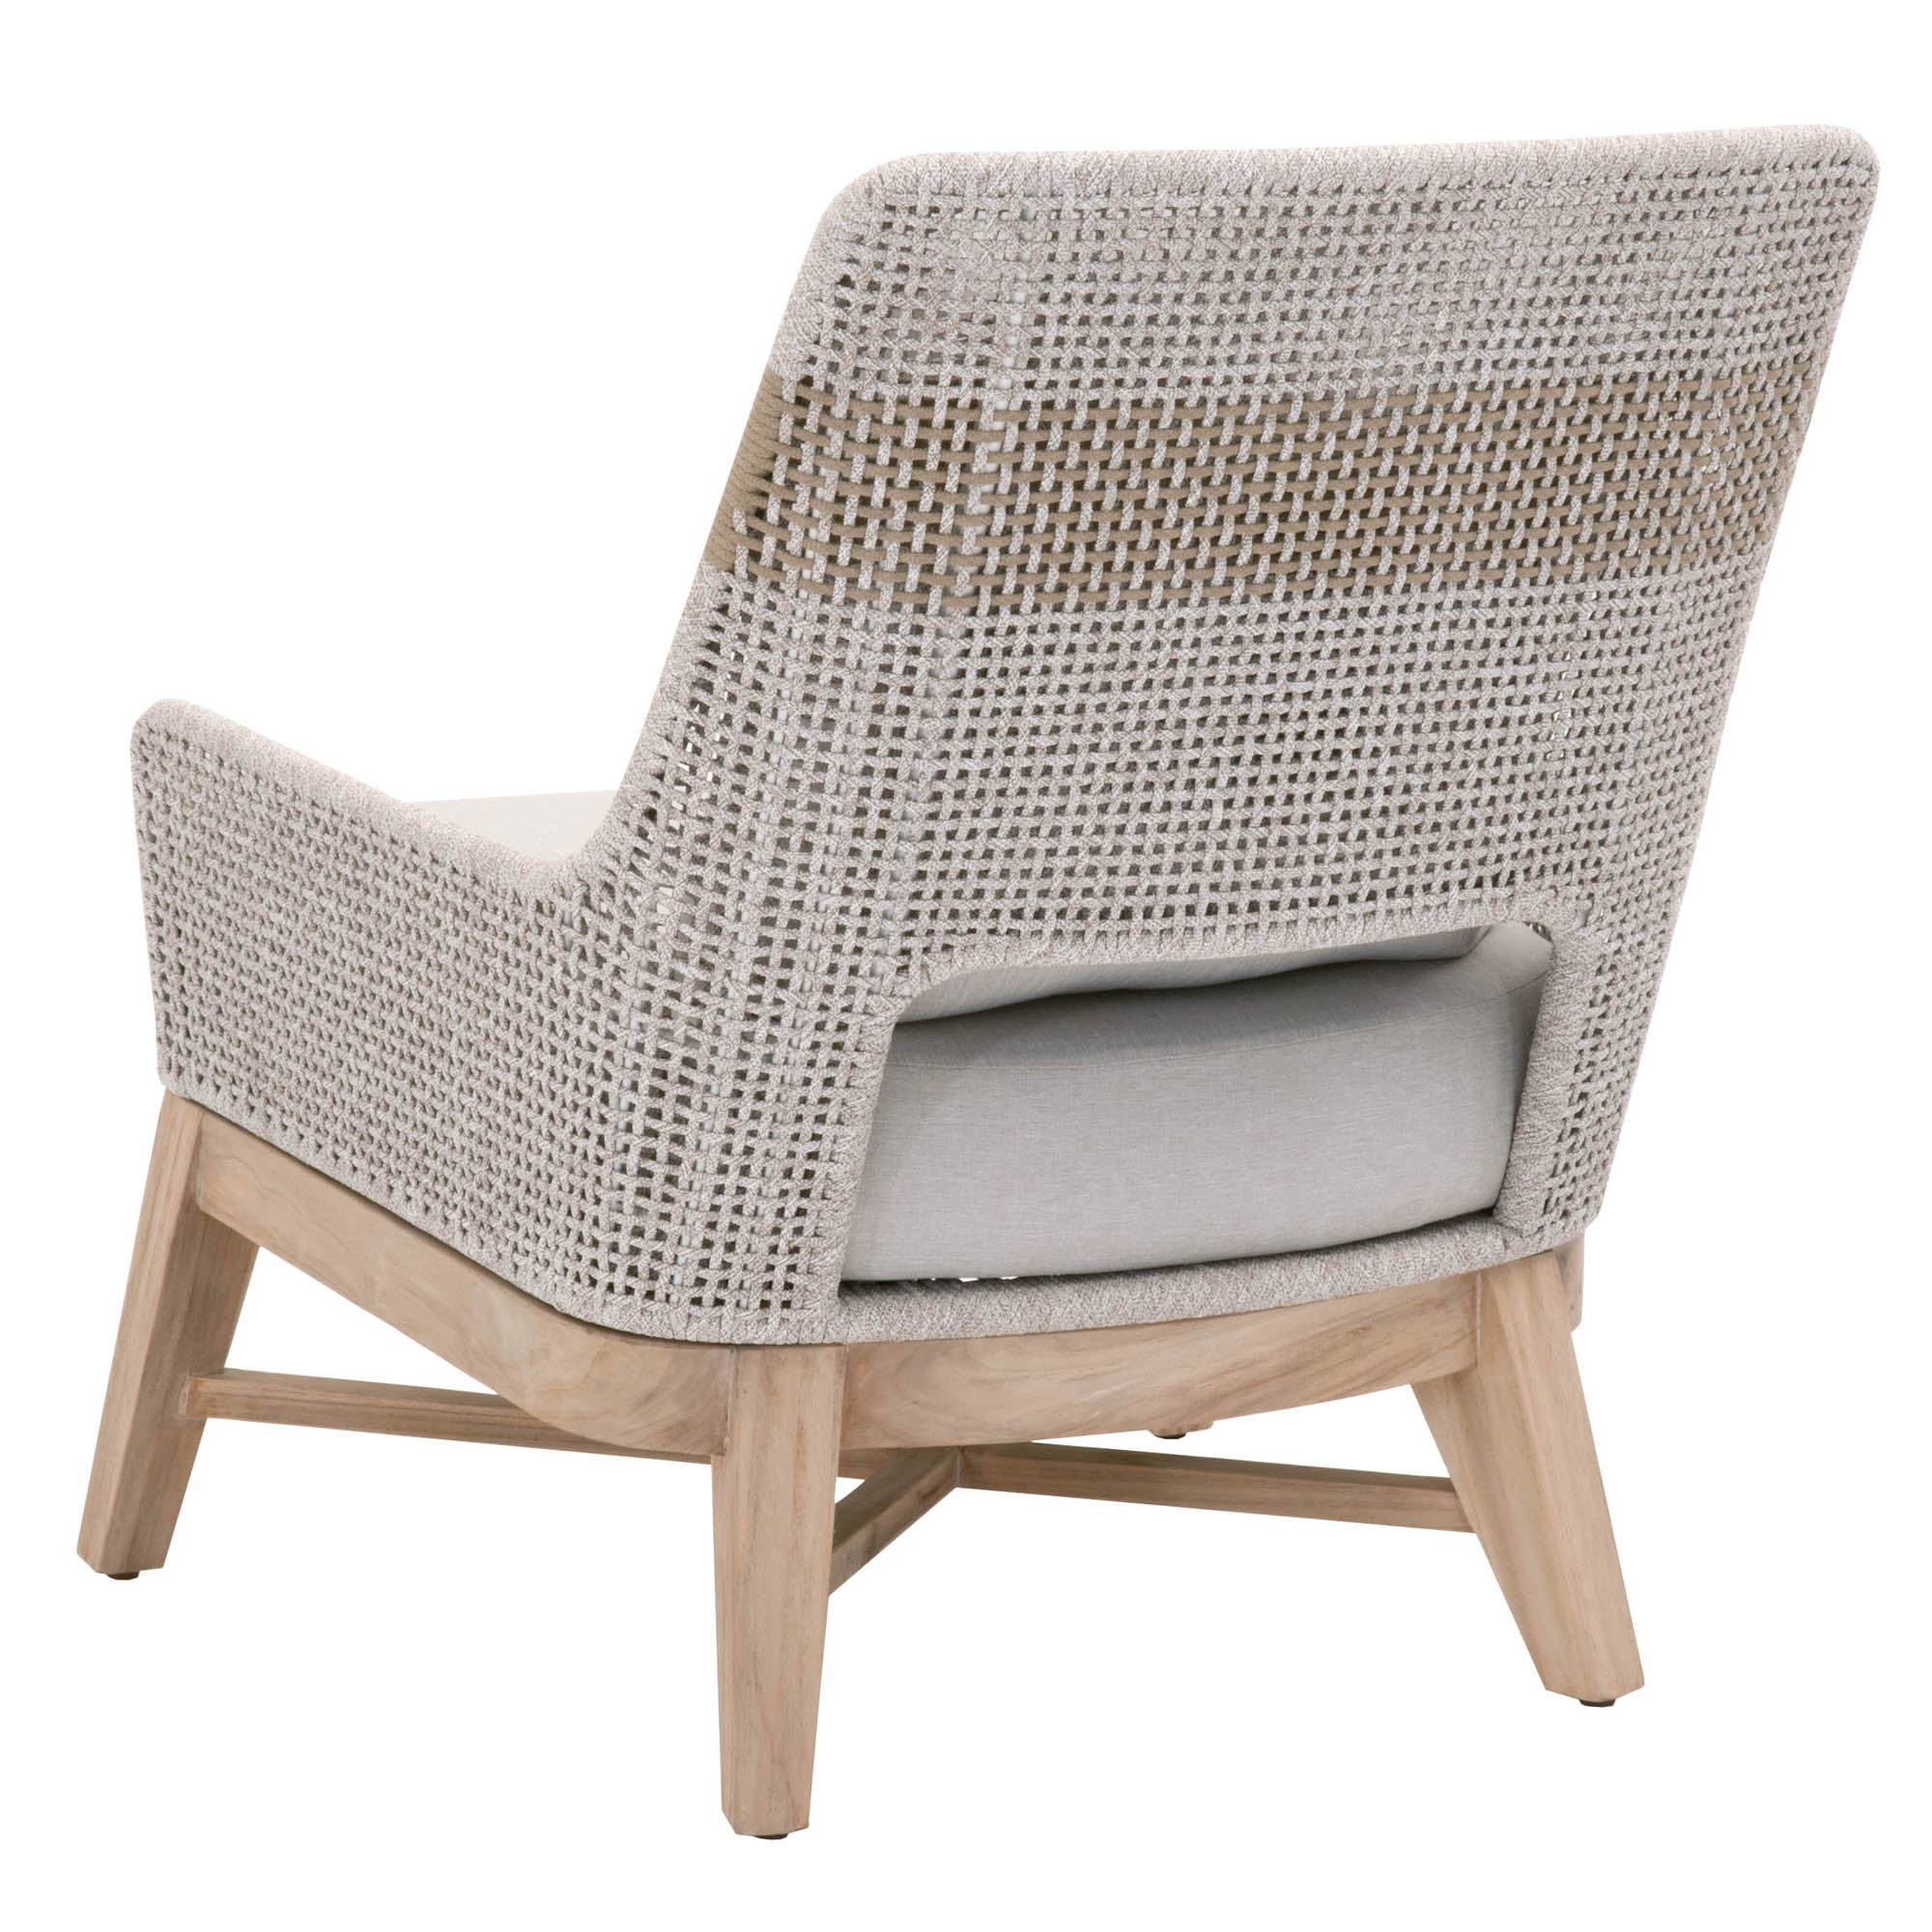 Tapestry Outdoor Club Chair, Taupe - Image 3